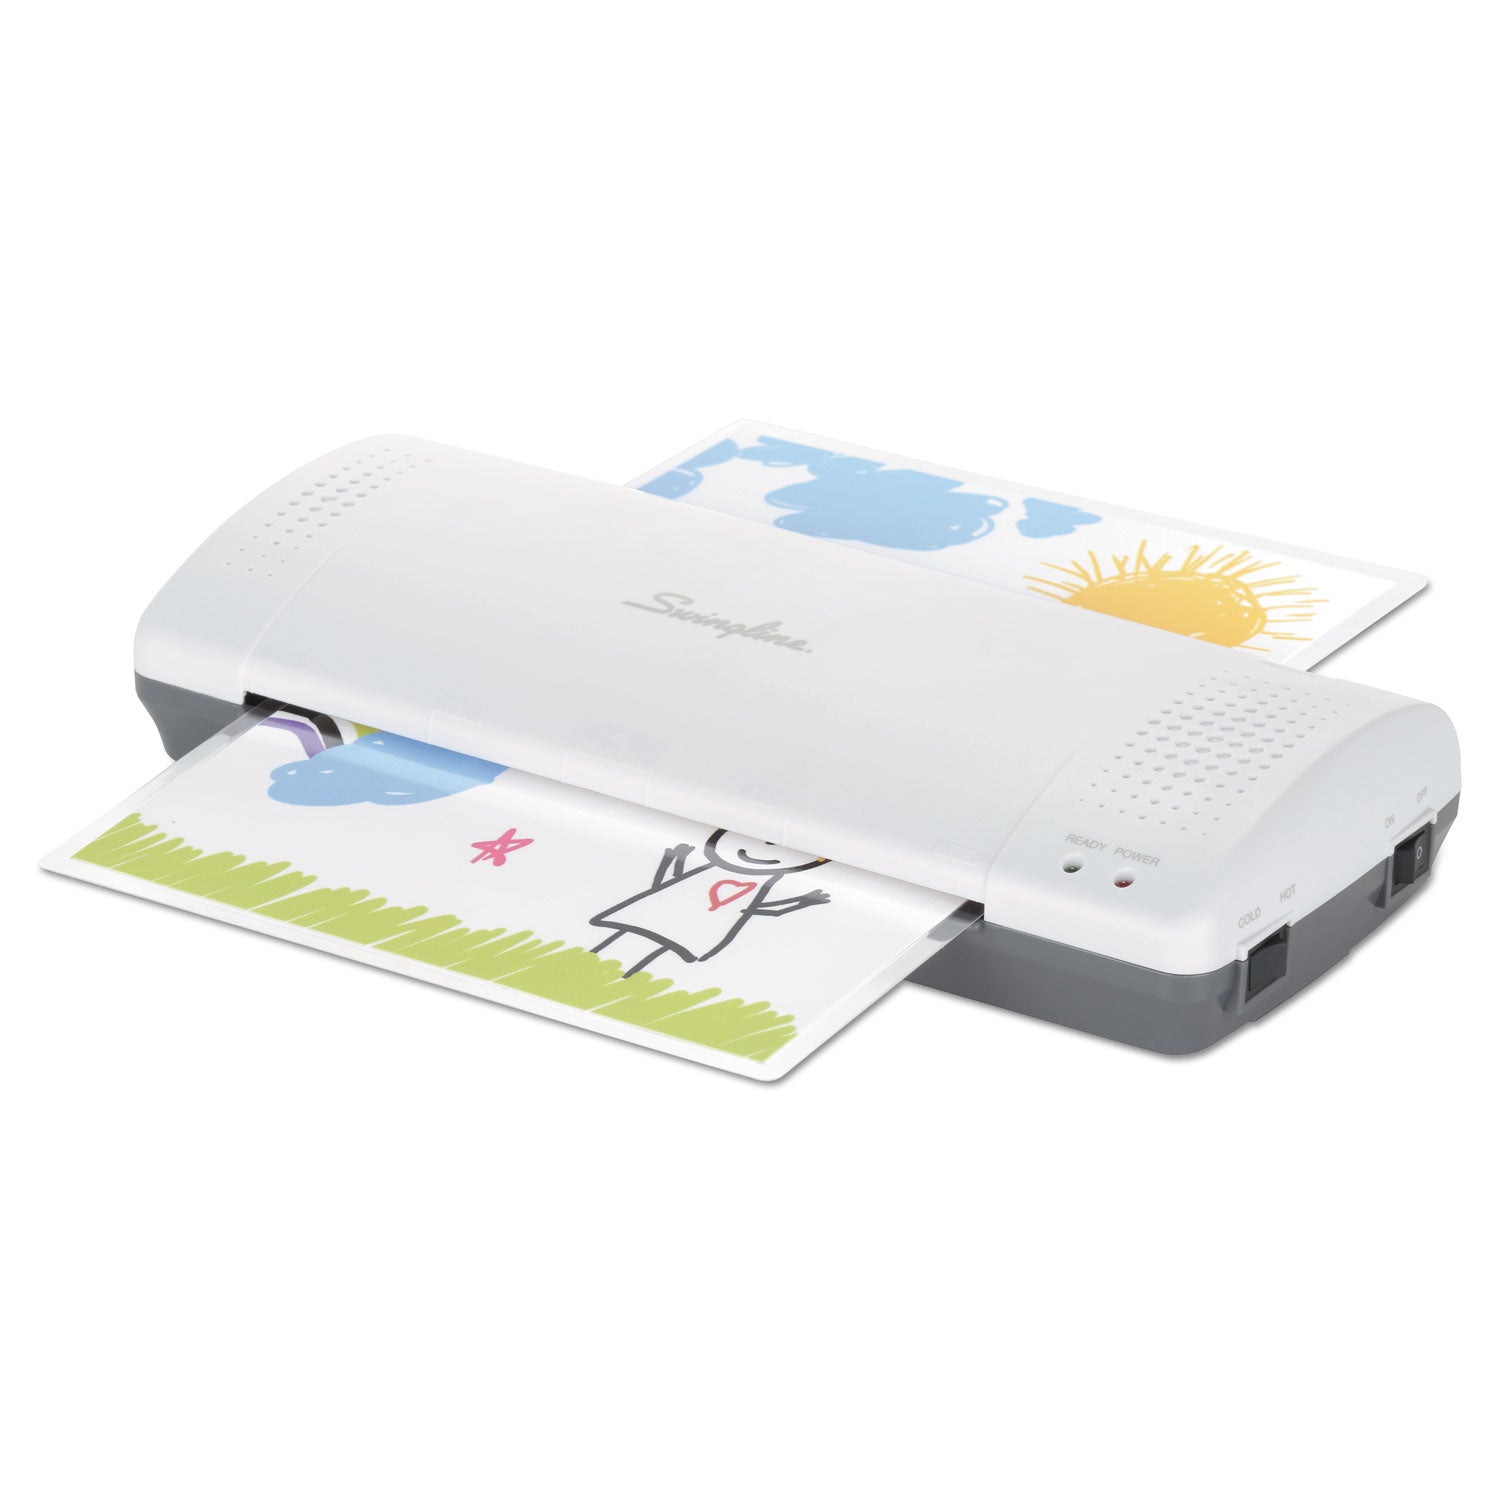 inspire-plus-thermal-pouch-laminator-9-max-document-width-5-mil-max-document-thickness_swi1701857cm - 1